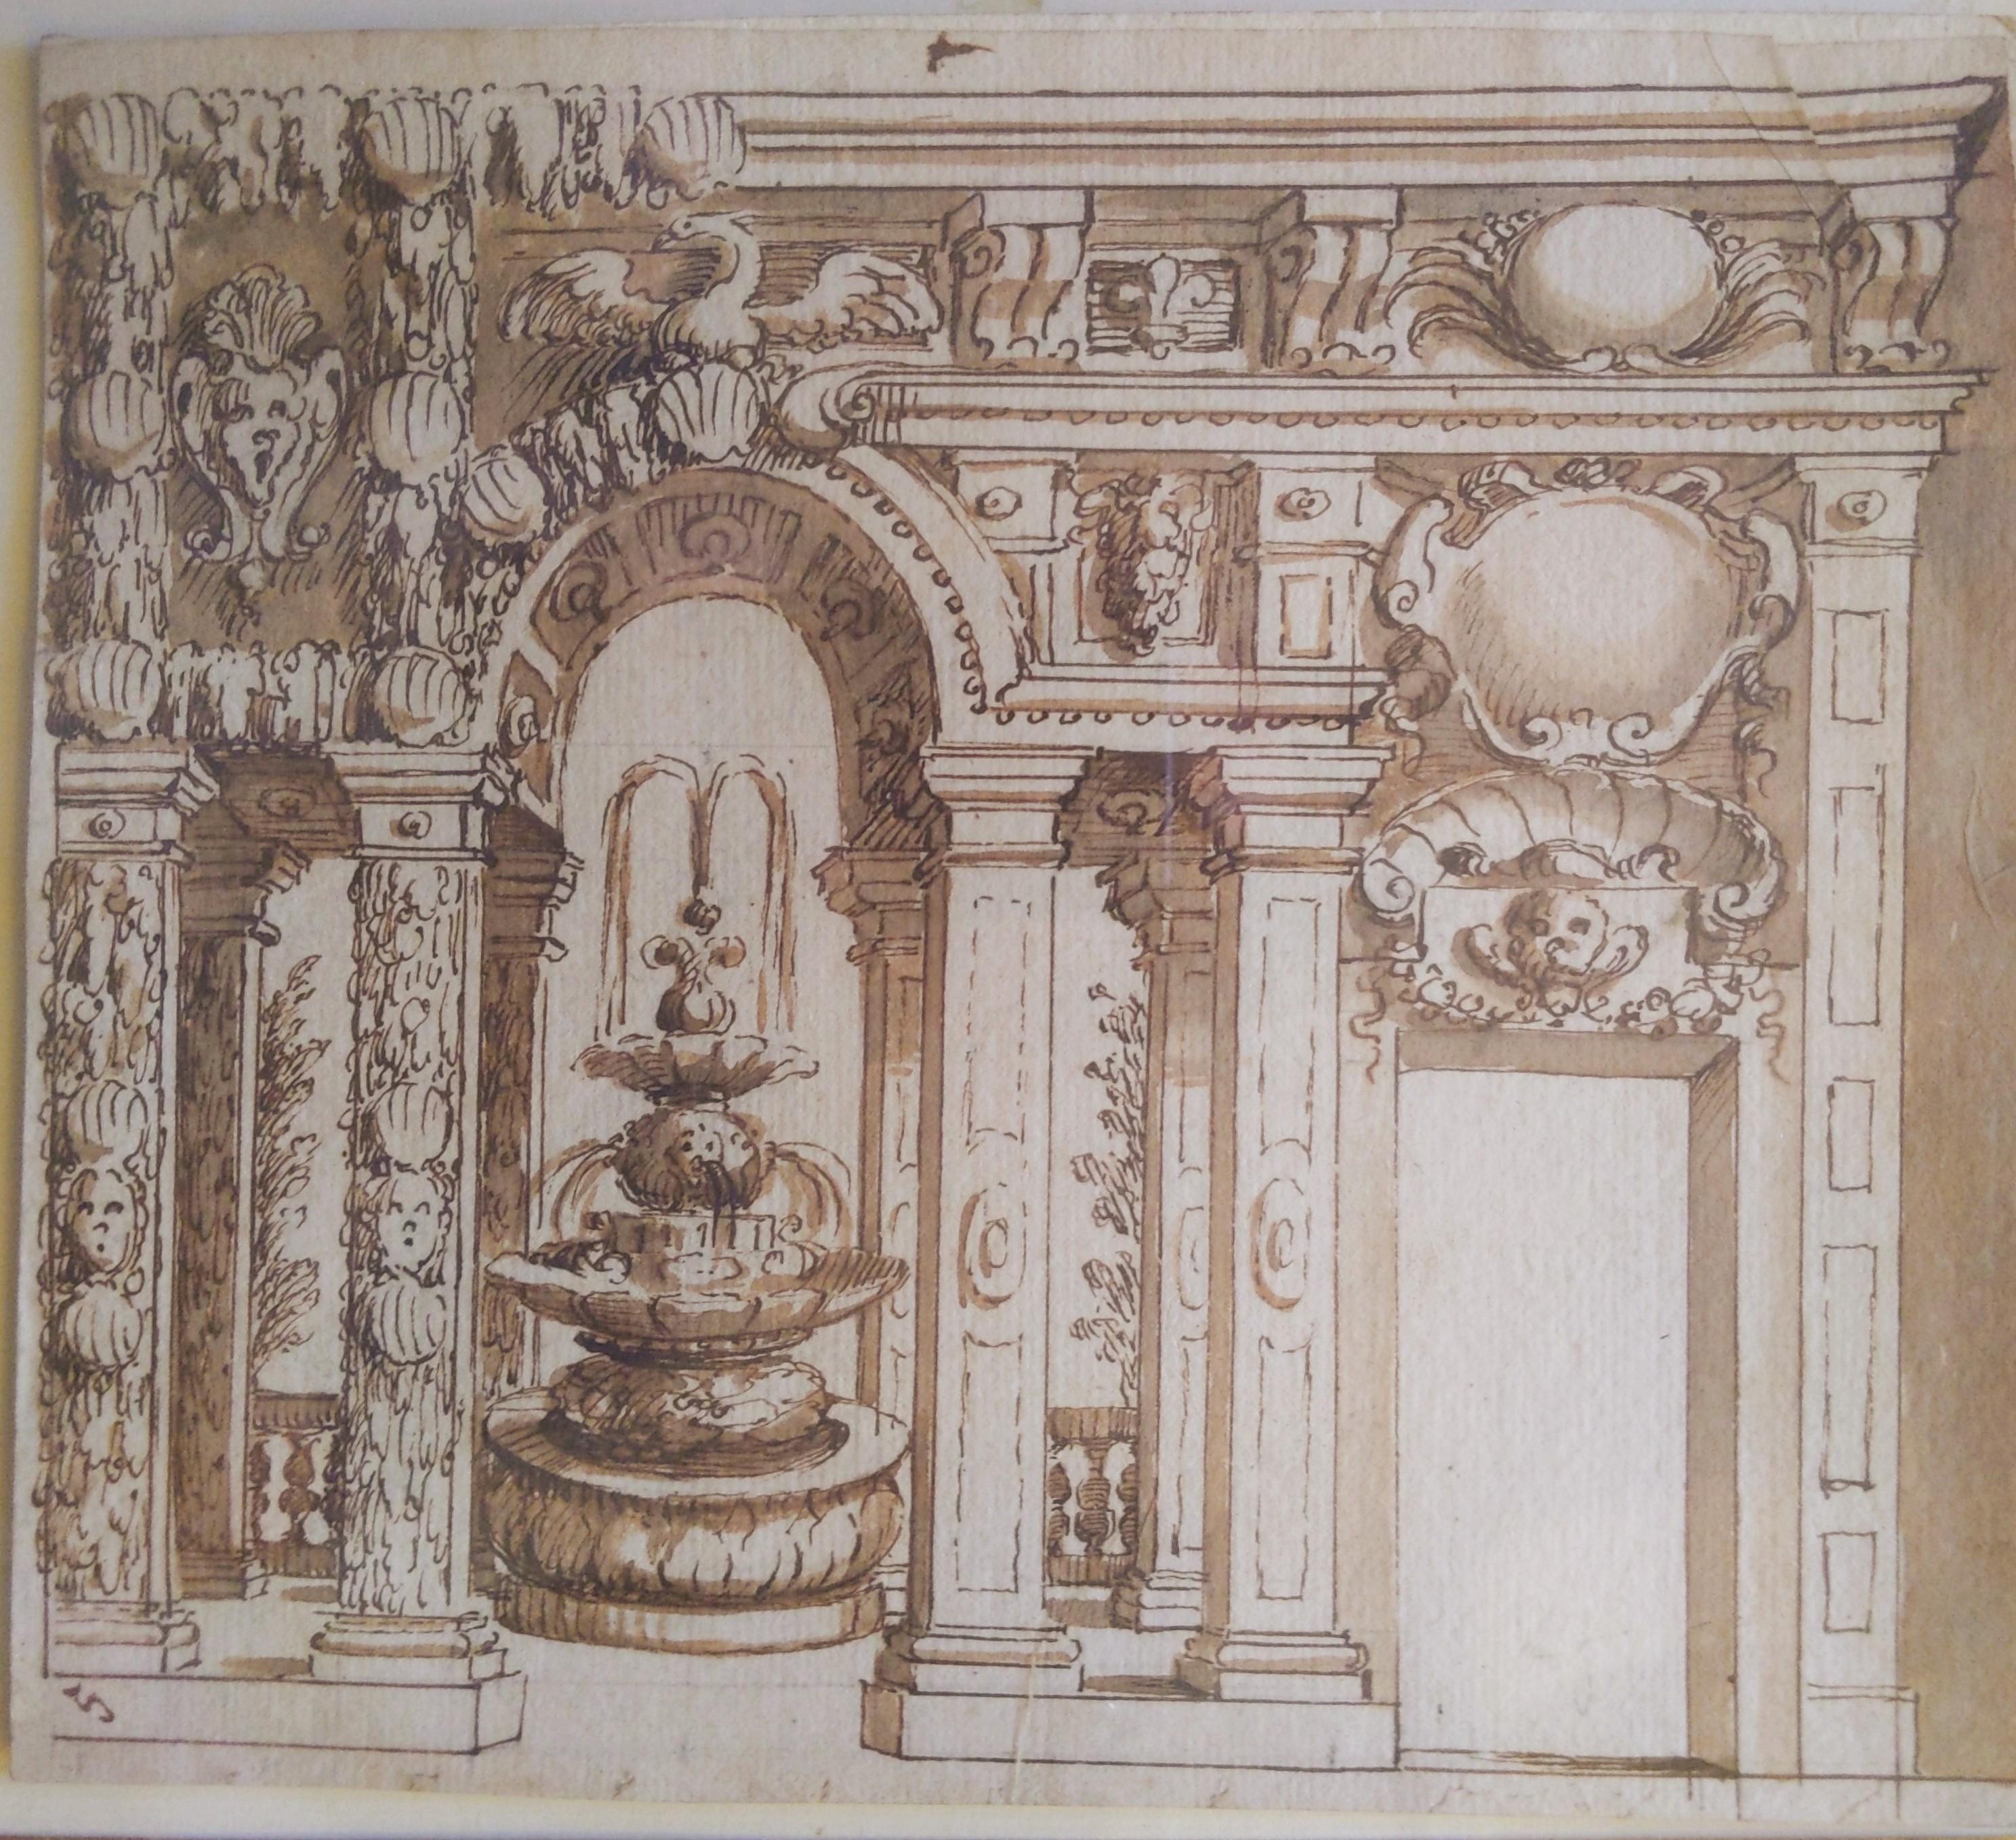 Gallery and Fountain project in a garden, Italy 1550-1625 - Art by Unknown